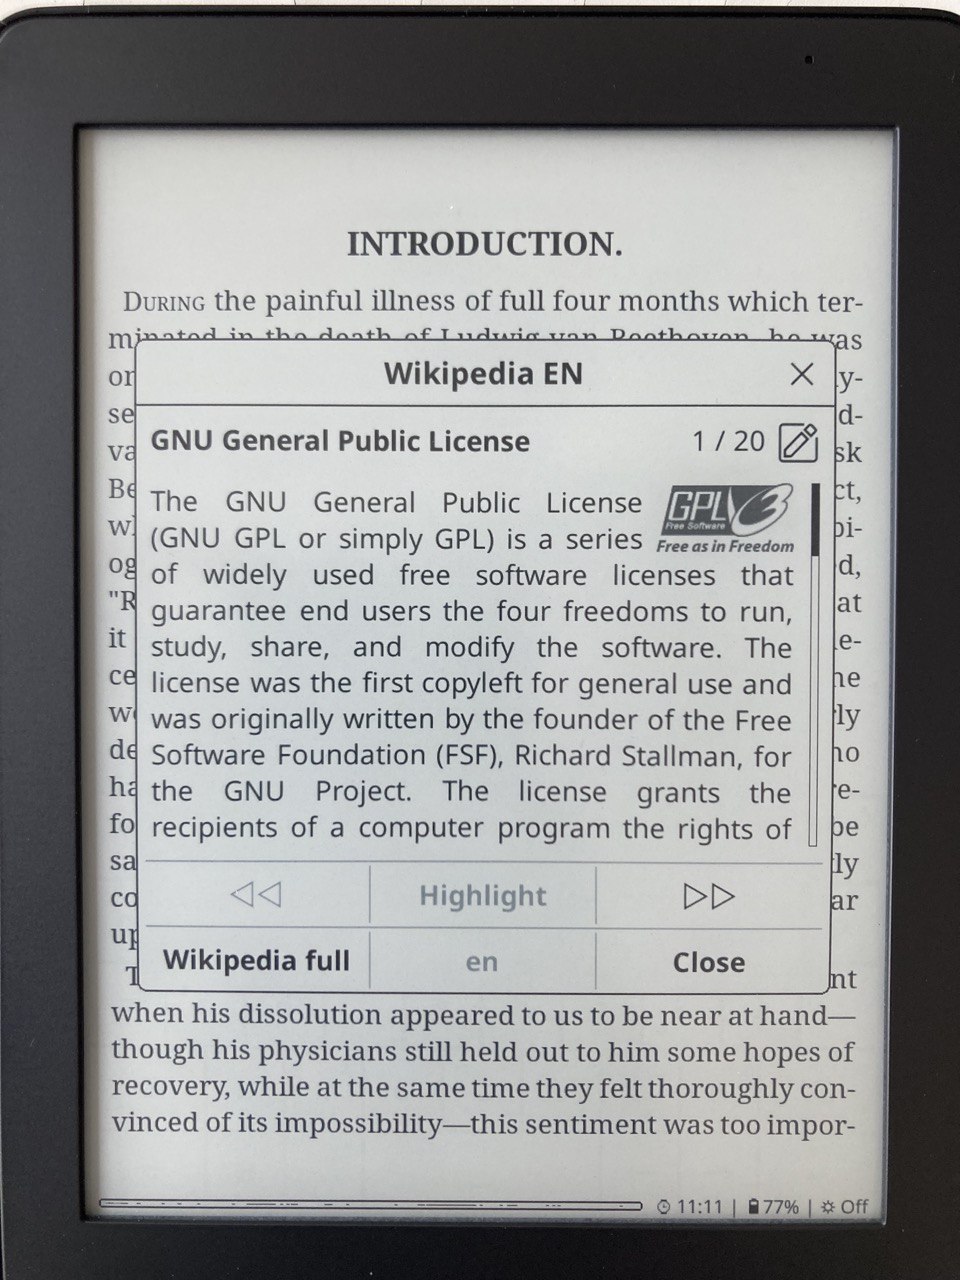 An image of Kobo reader running KOReader and displaying a Wikipedia article of the GNU General Public License.